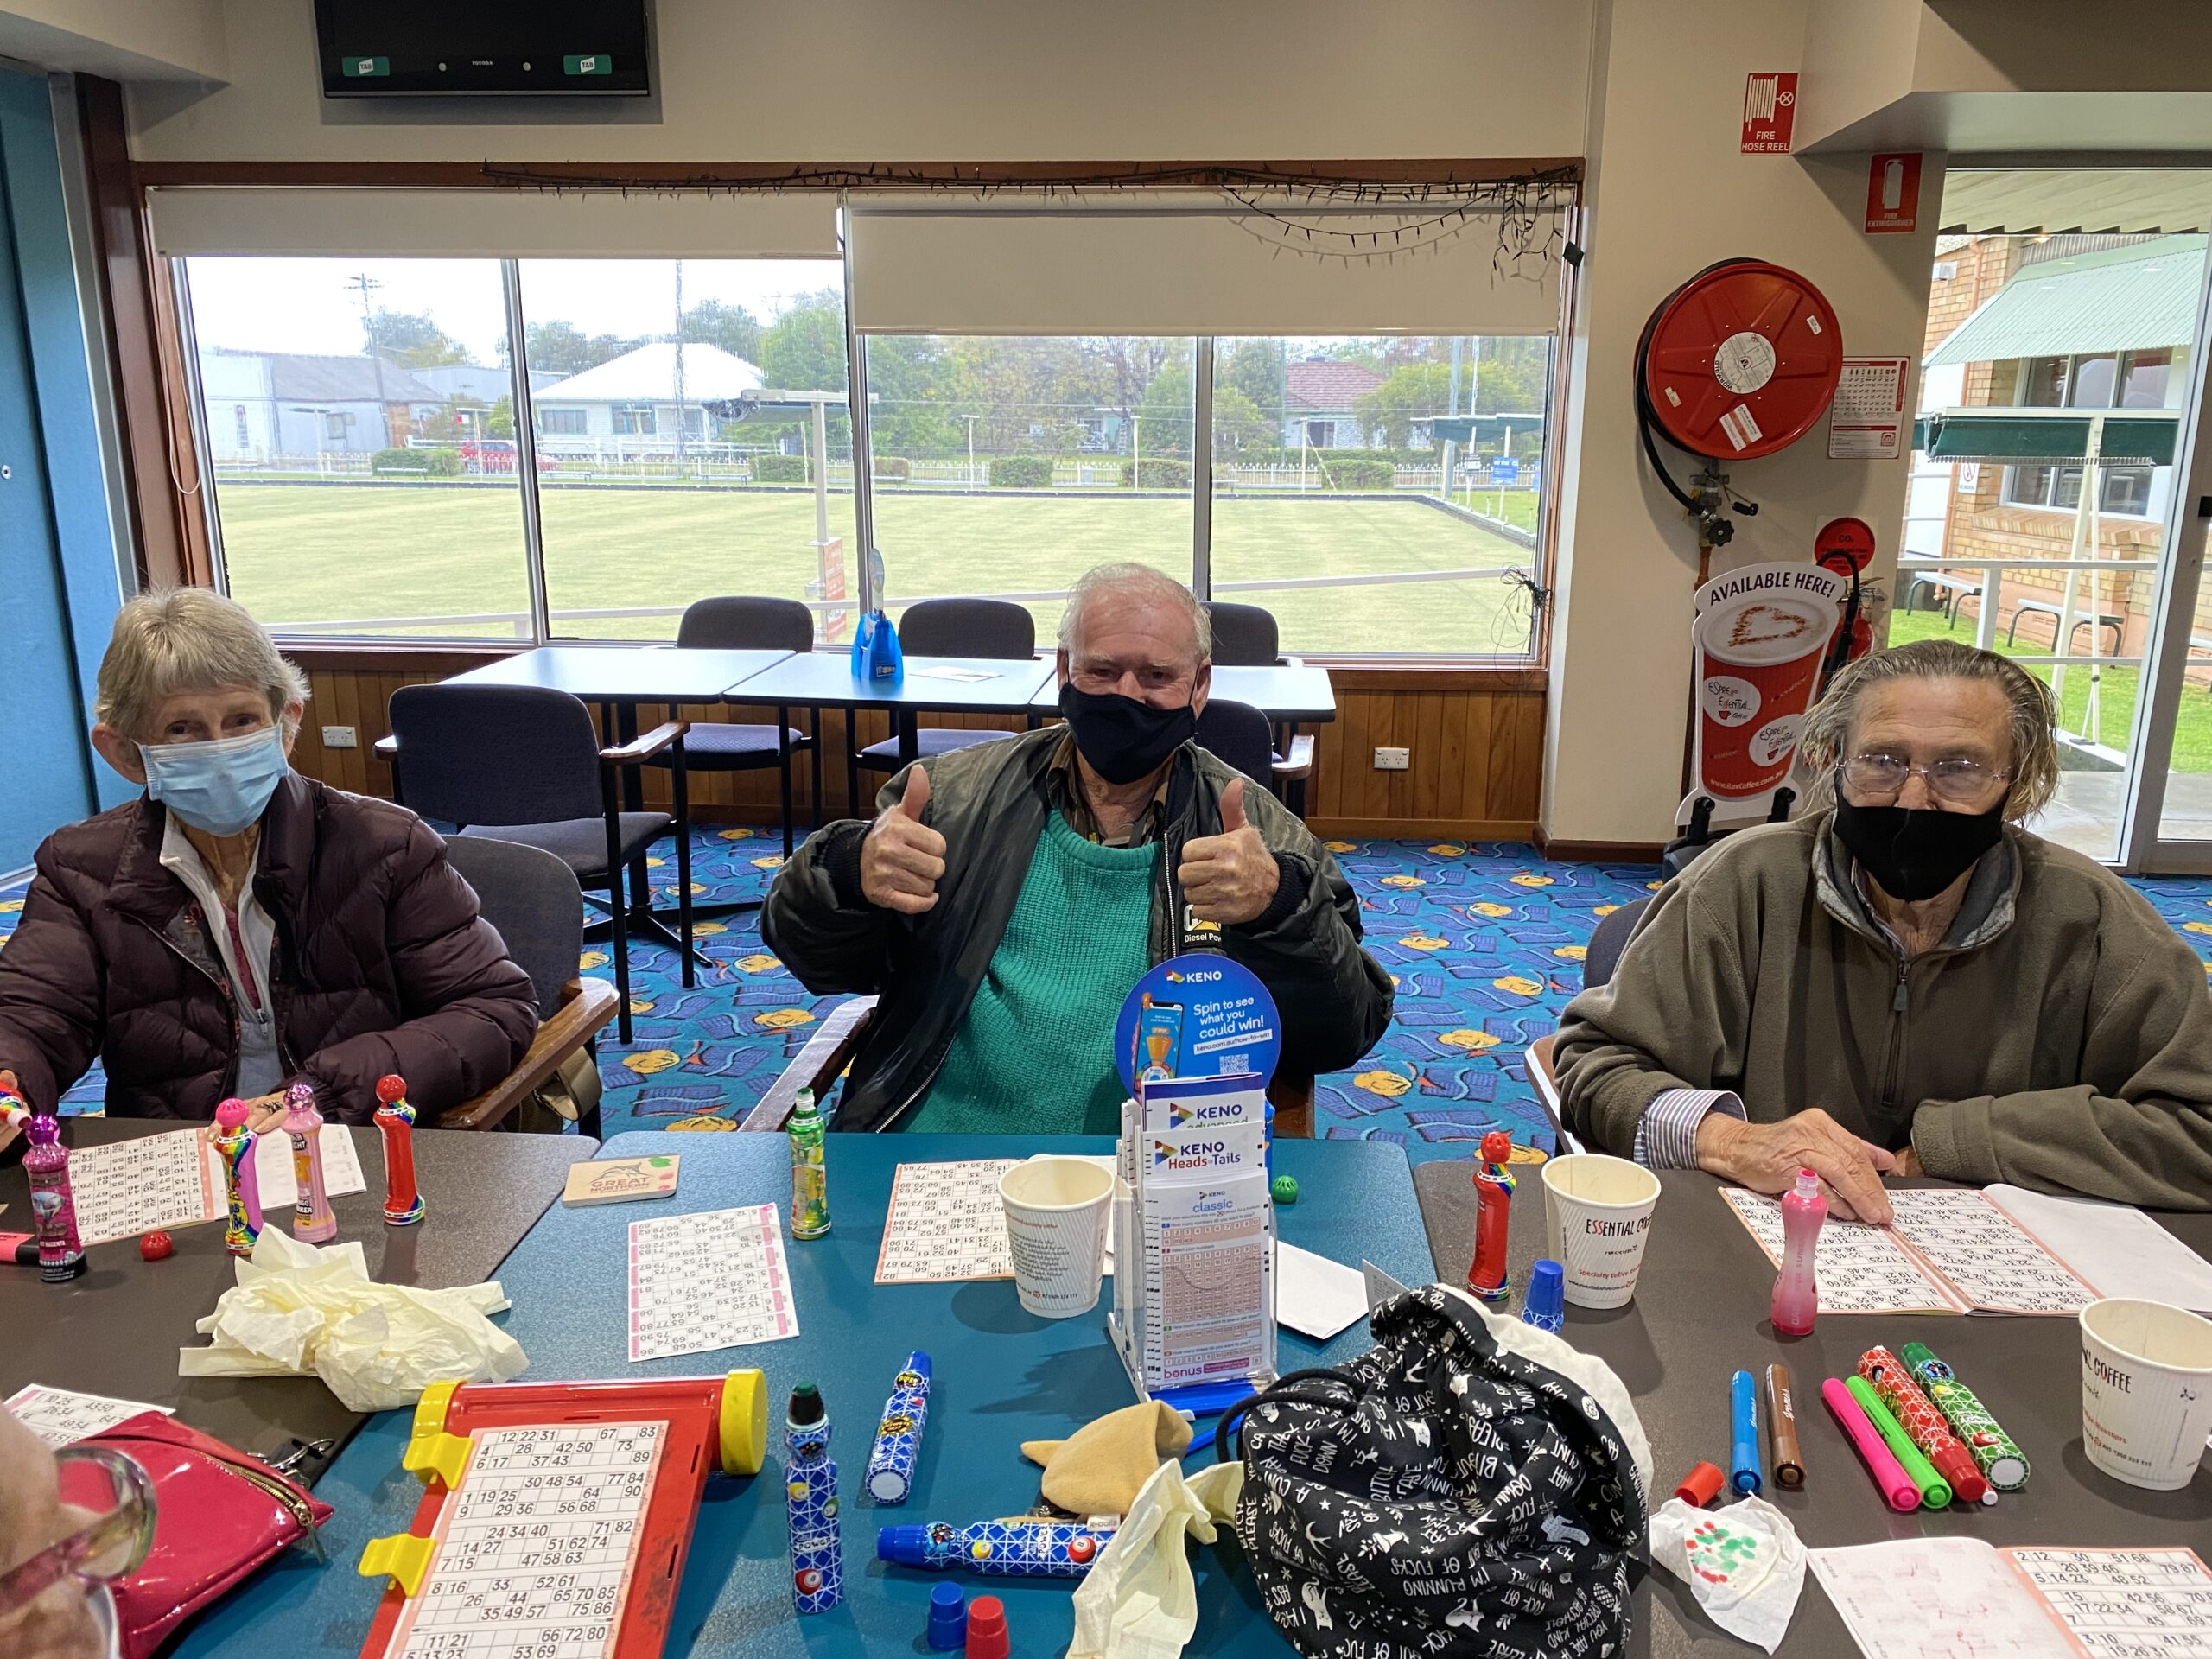 Judy Tribe and John and Judy Lubke enjoying the return of social activities at the Wee Waa Bowling Club after COVID-19 restrictions.